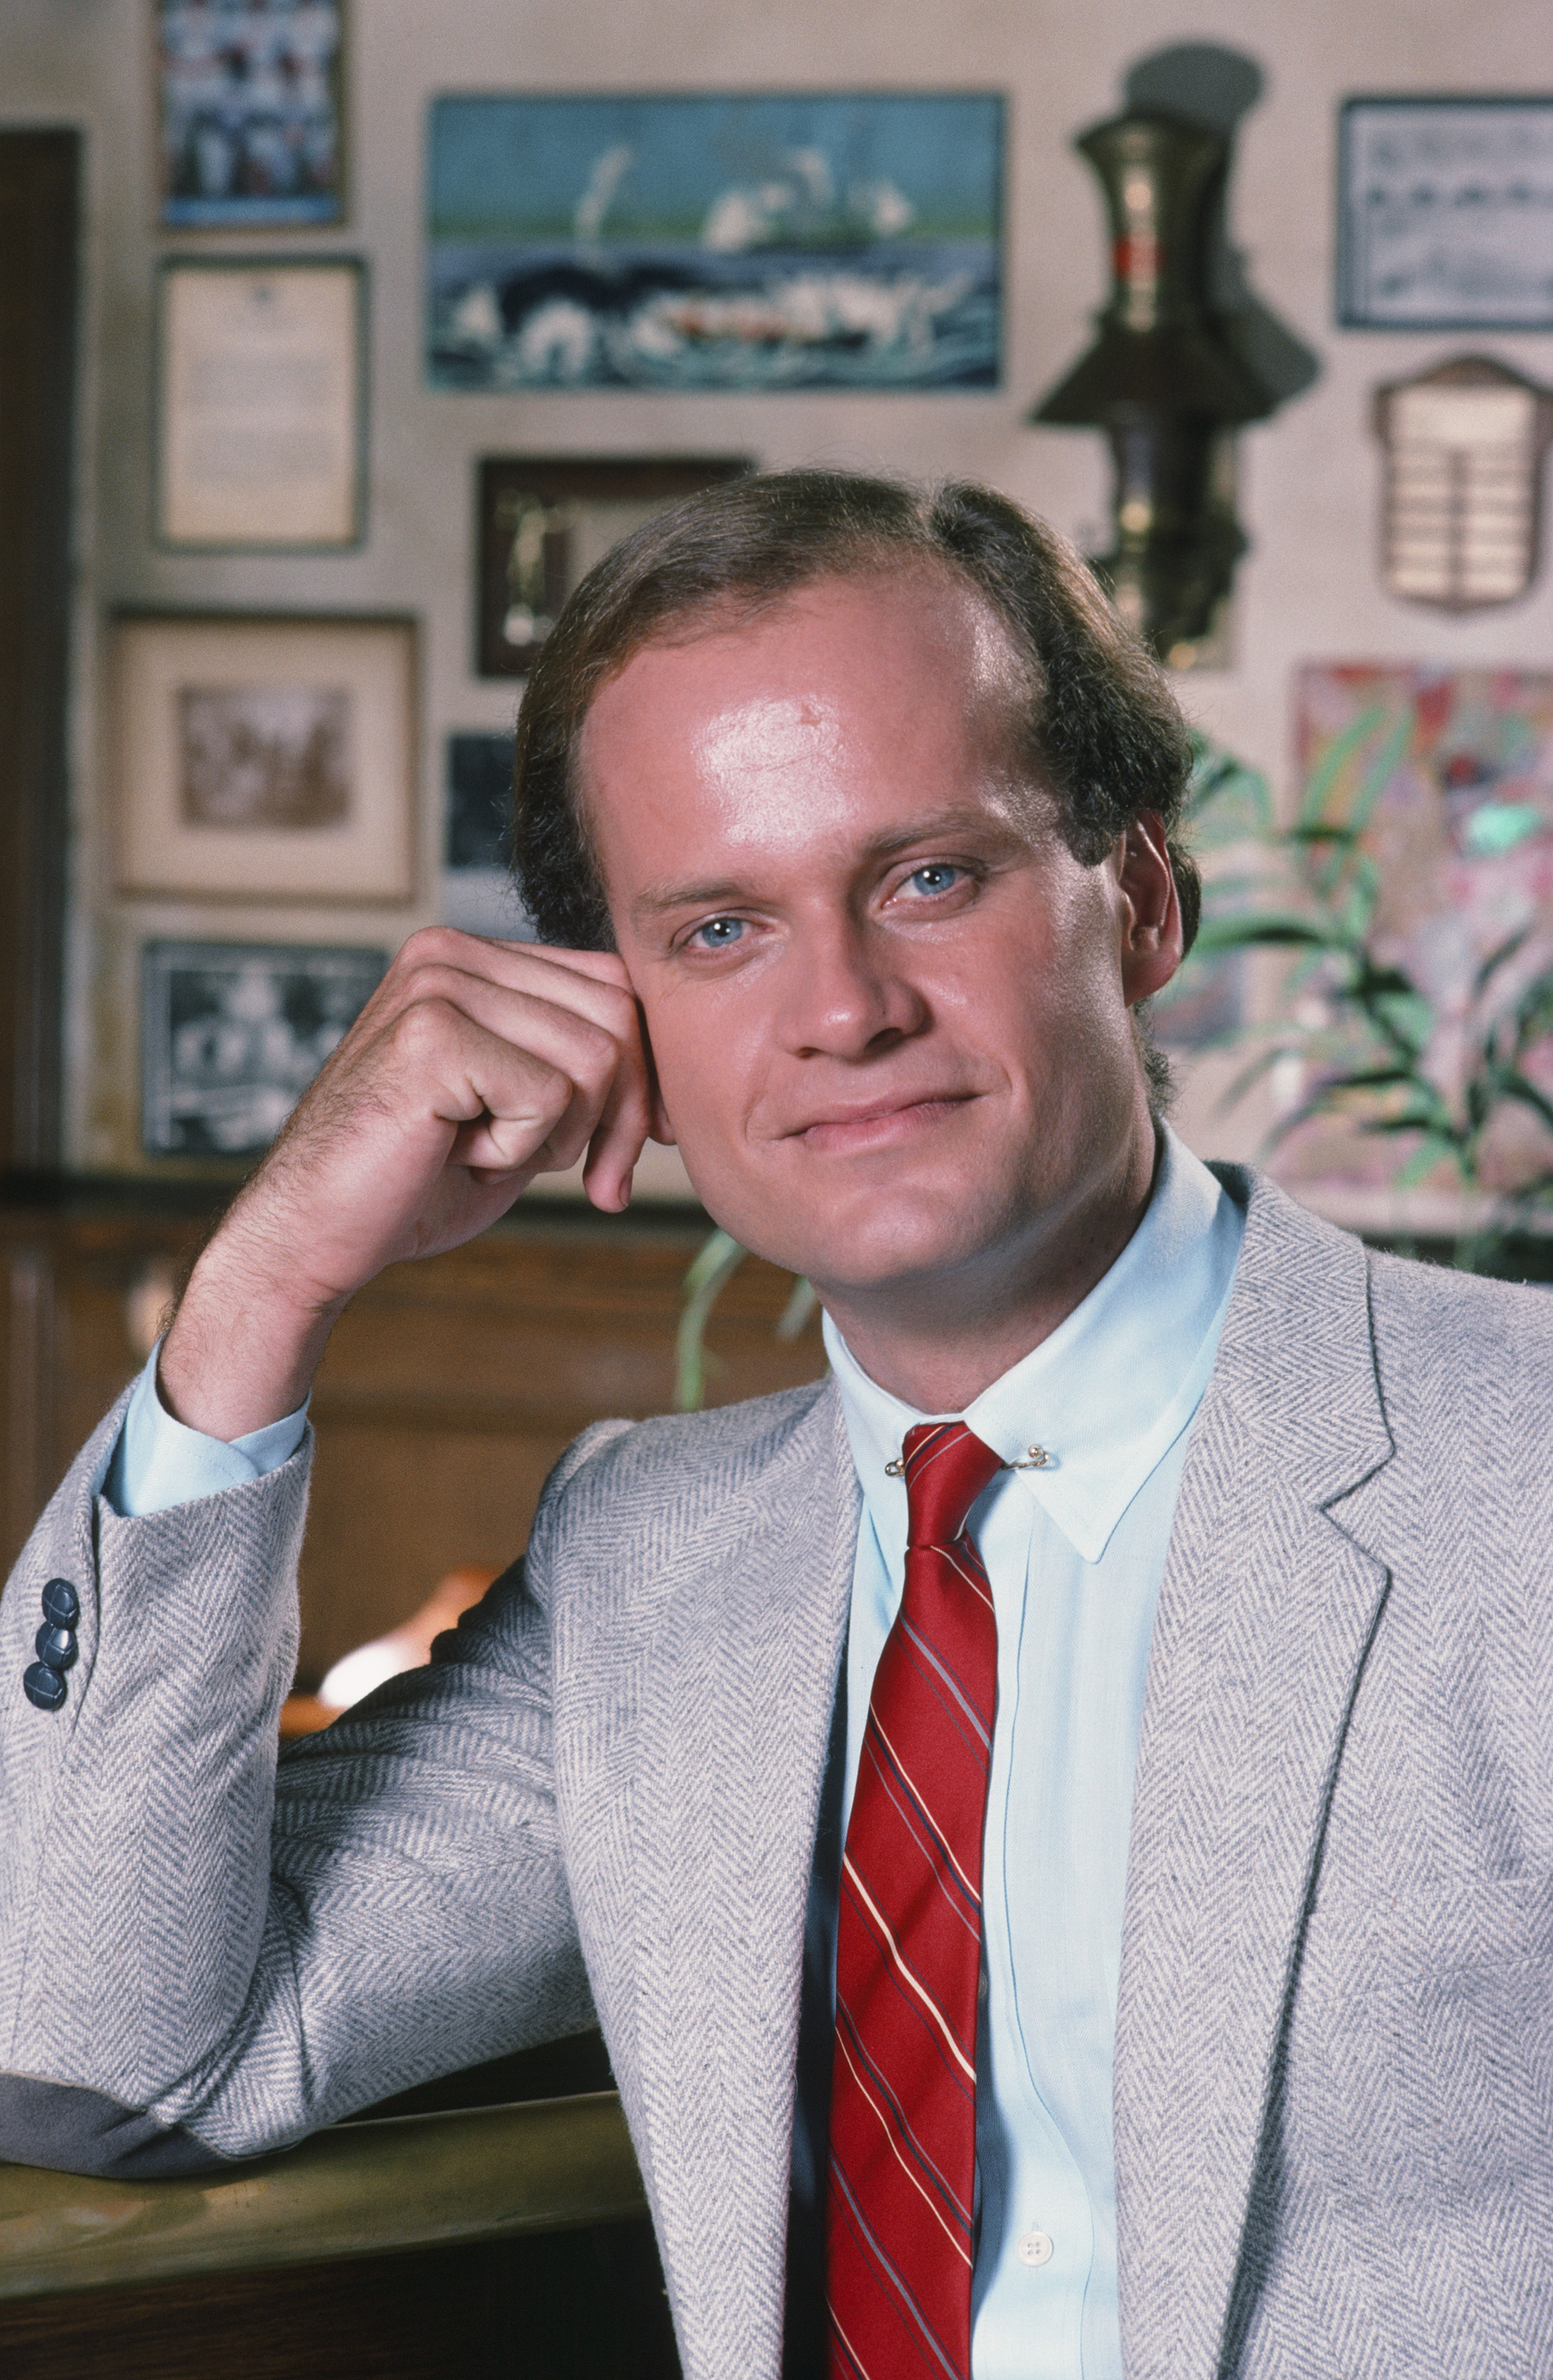 Kelsey Grammer as Dr. Frasier Crane in "Cheers," circa 1980s | Source: Getty Images